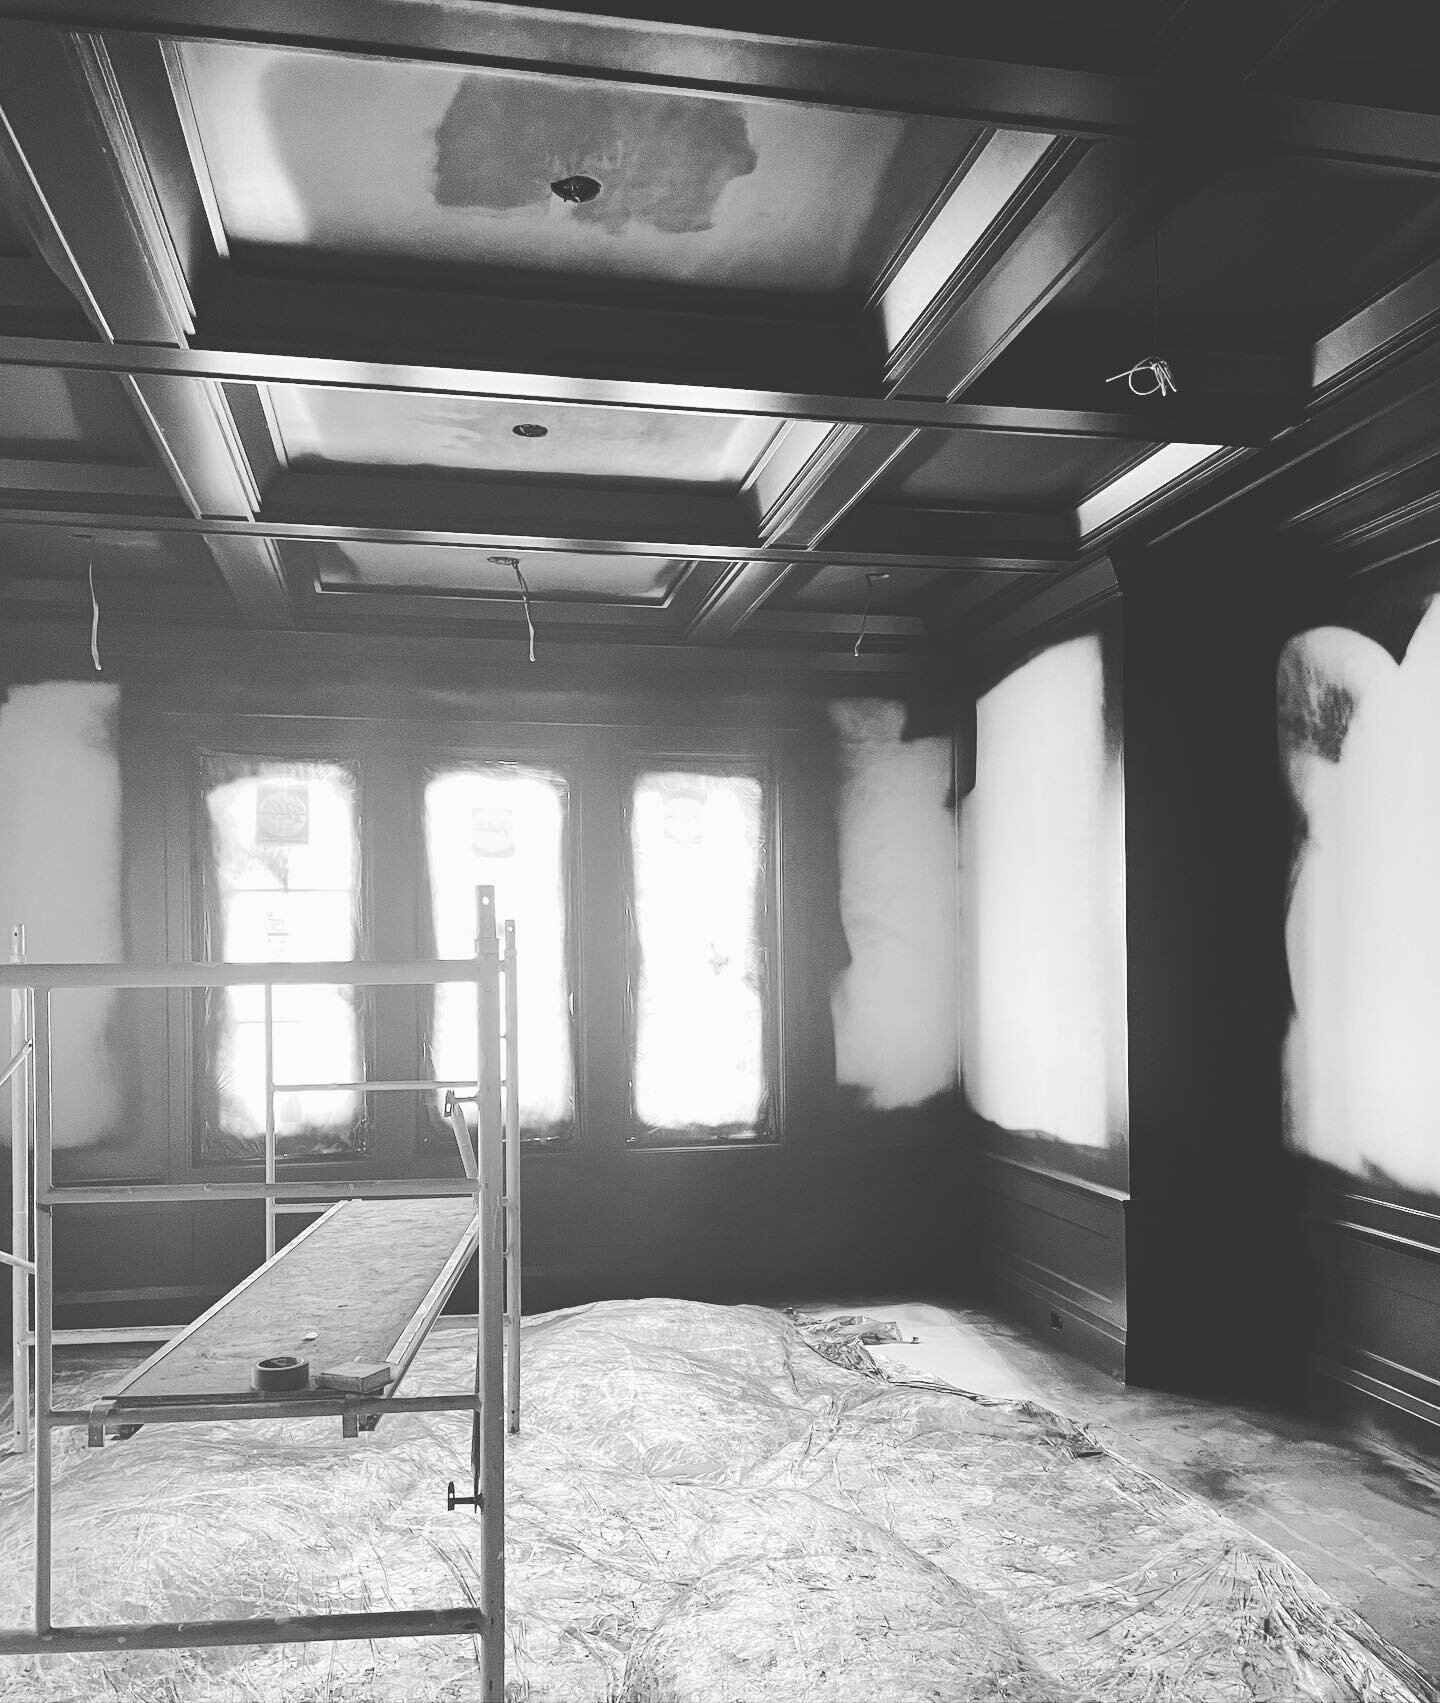 High gloss black in black and white on the eve of a whiteout. Back at it #2022 
&bull;
&bull;
&bull;
#architecture #interiors #renovations #black #highglosspaint #highgloss #blackwalls #blackdiningroom #coffers #millwork #blackceiling #wallpaper  #in